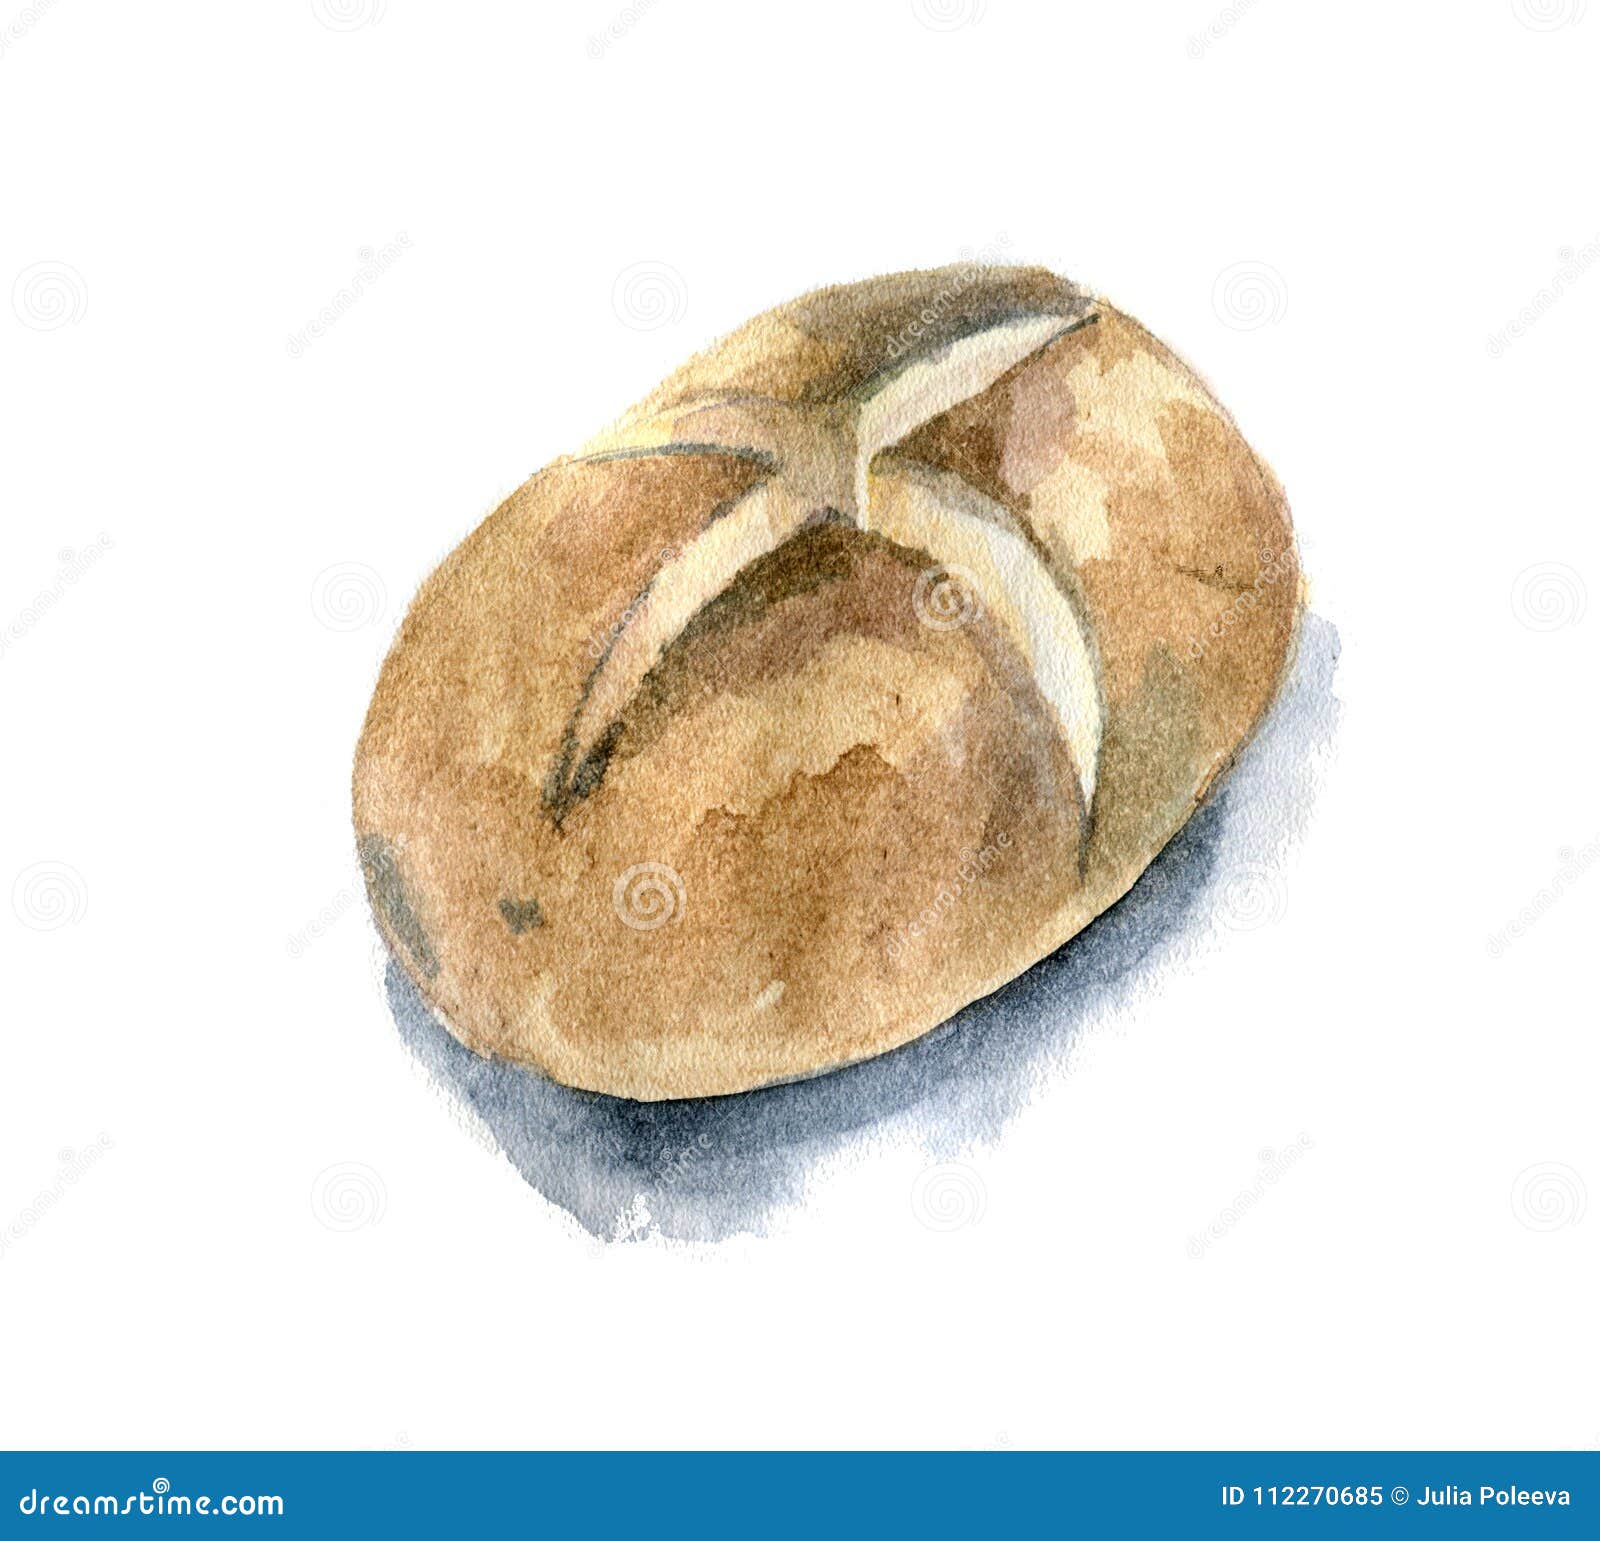 Baked Jacket Potatoes. Hand Drawn Watercolor Illustration. Isolated